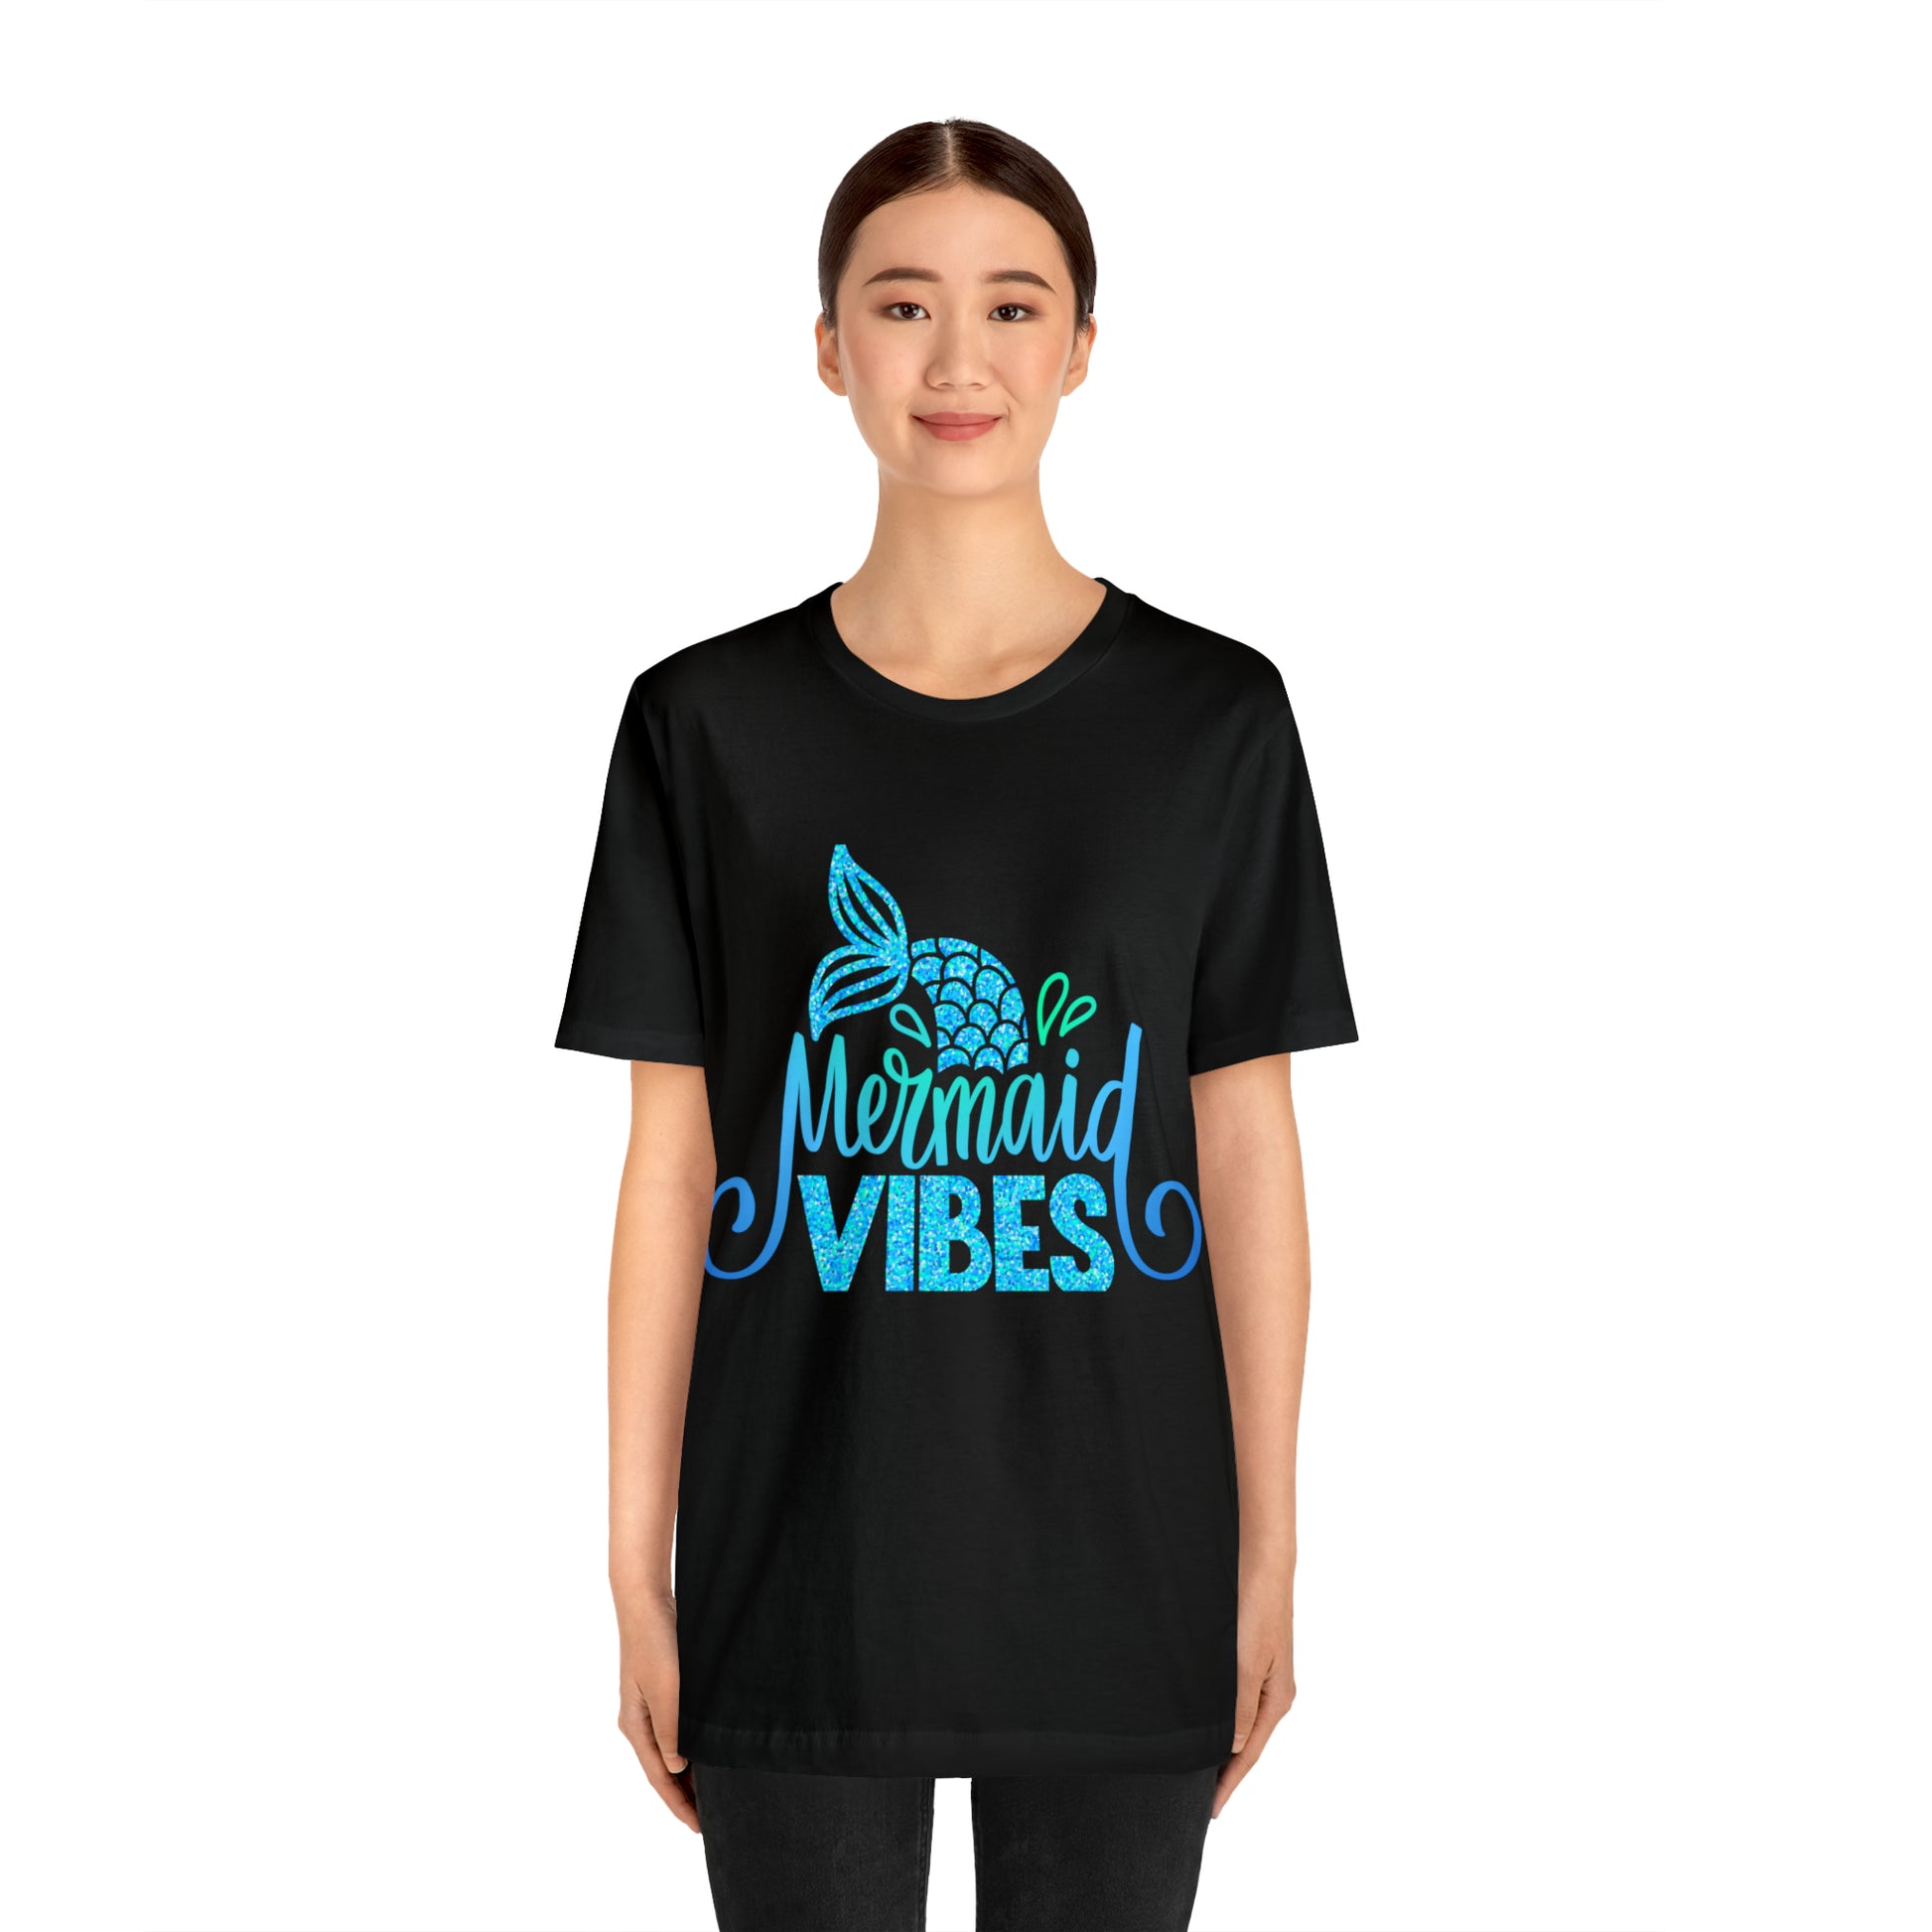 Mermaid Vives T-Shirt - Unisex jersey tee with an enchanting design, soft cotton fabric, and ribbed knit collars, perfect for mermaid enthusiasts and lovers of mermaid-inspired clothing."